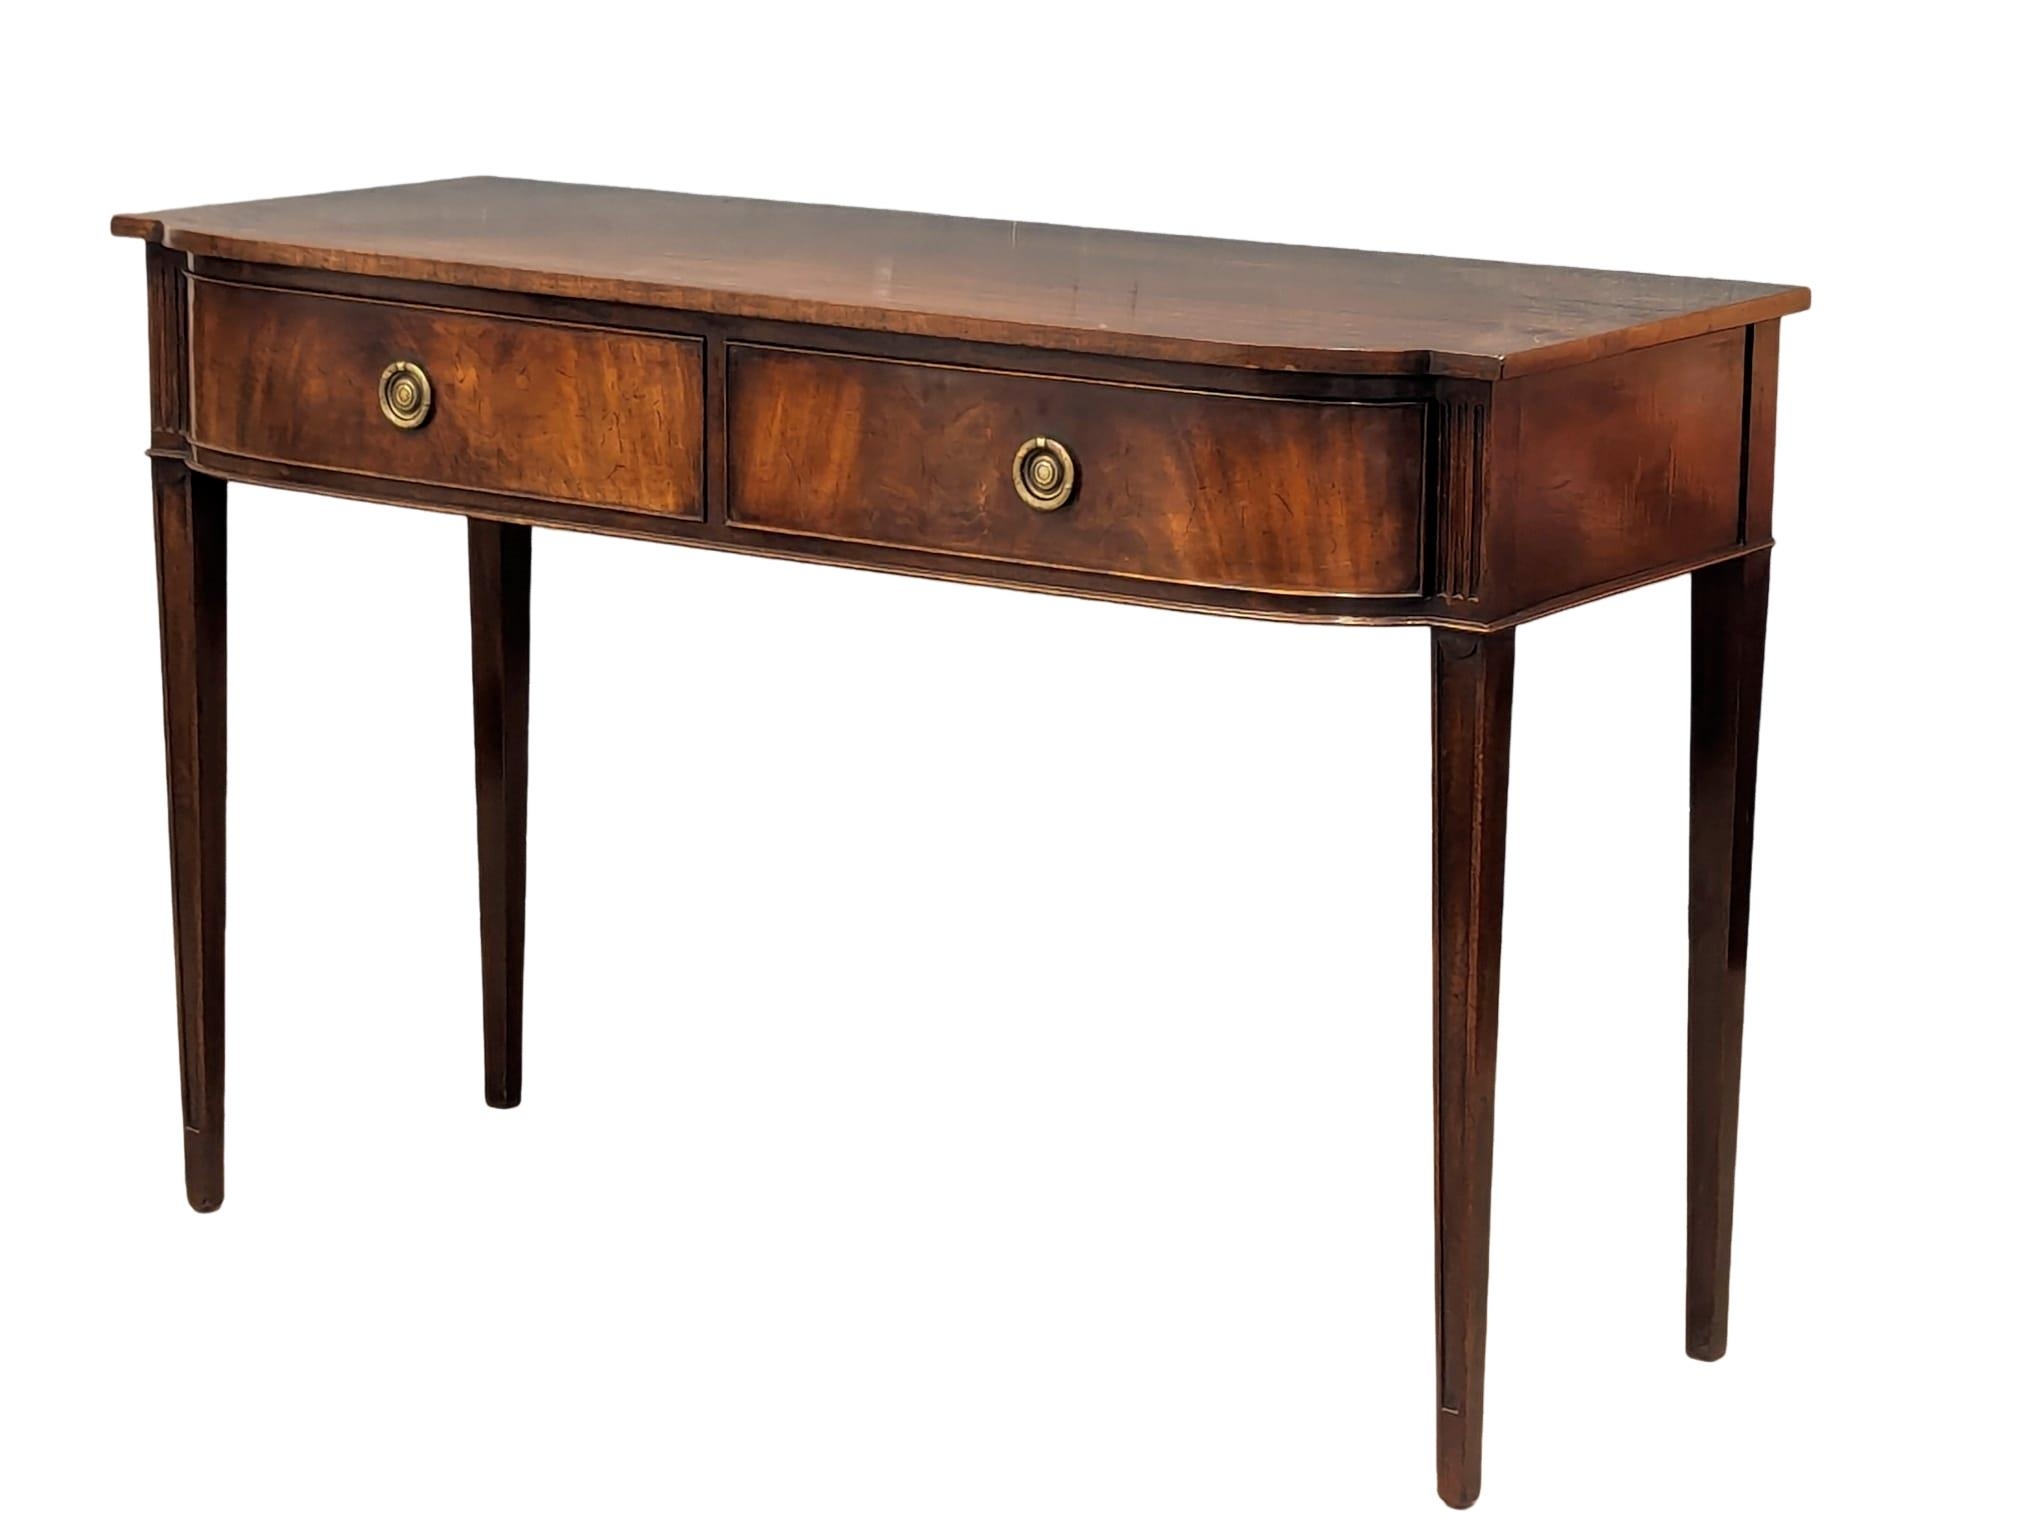 An early 20th Century inlaid mahogany console table in Hepplewhite style, 130cm x 52cm x 84cm